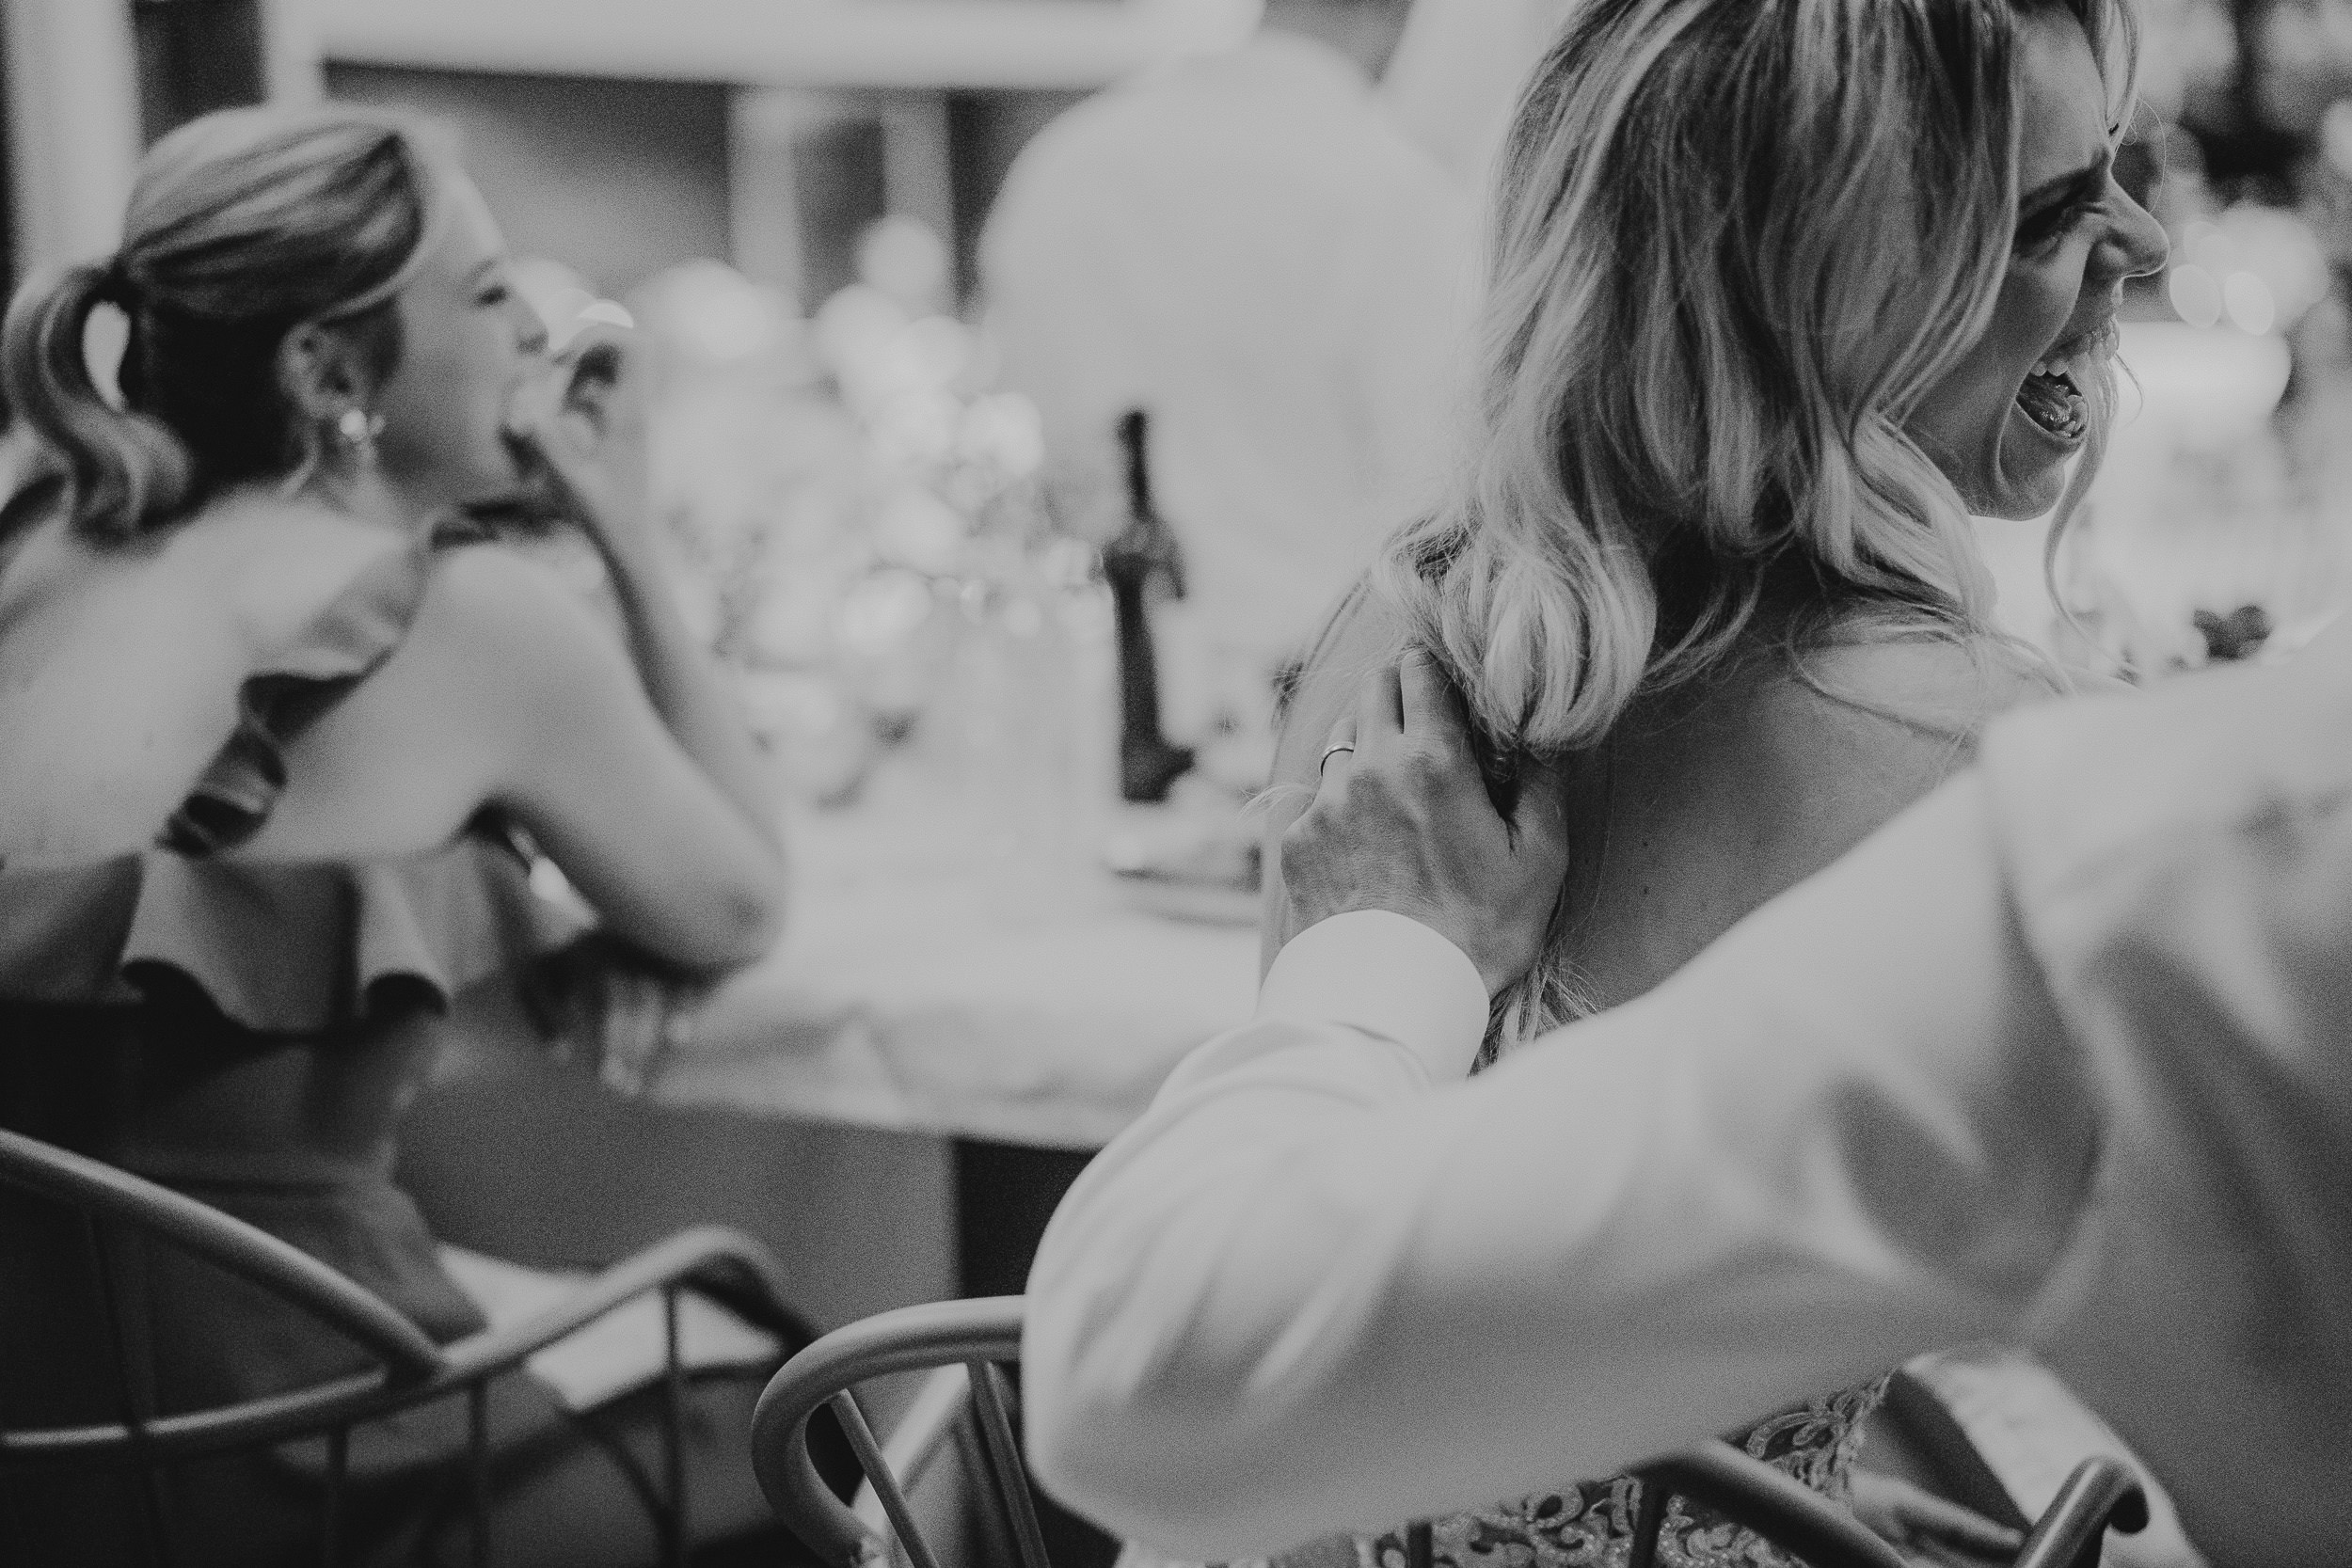 Wedding photographer captures a tender moment between bride and groom in a black and white photo.